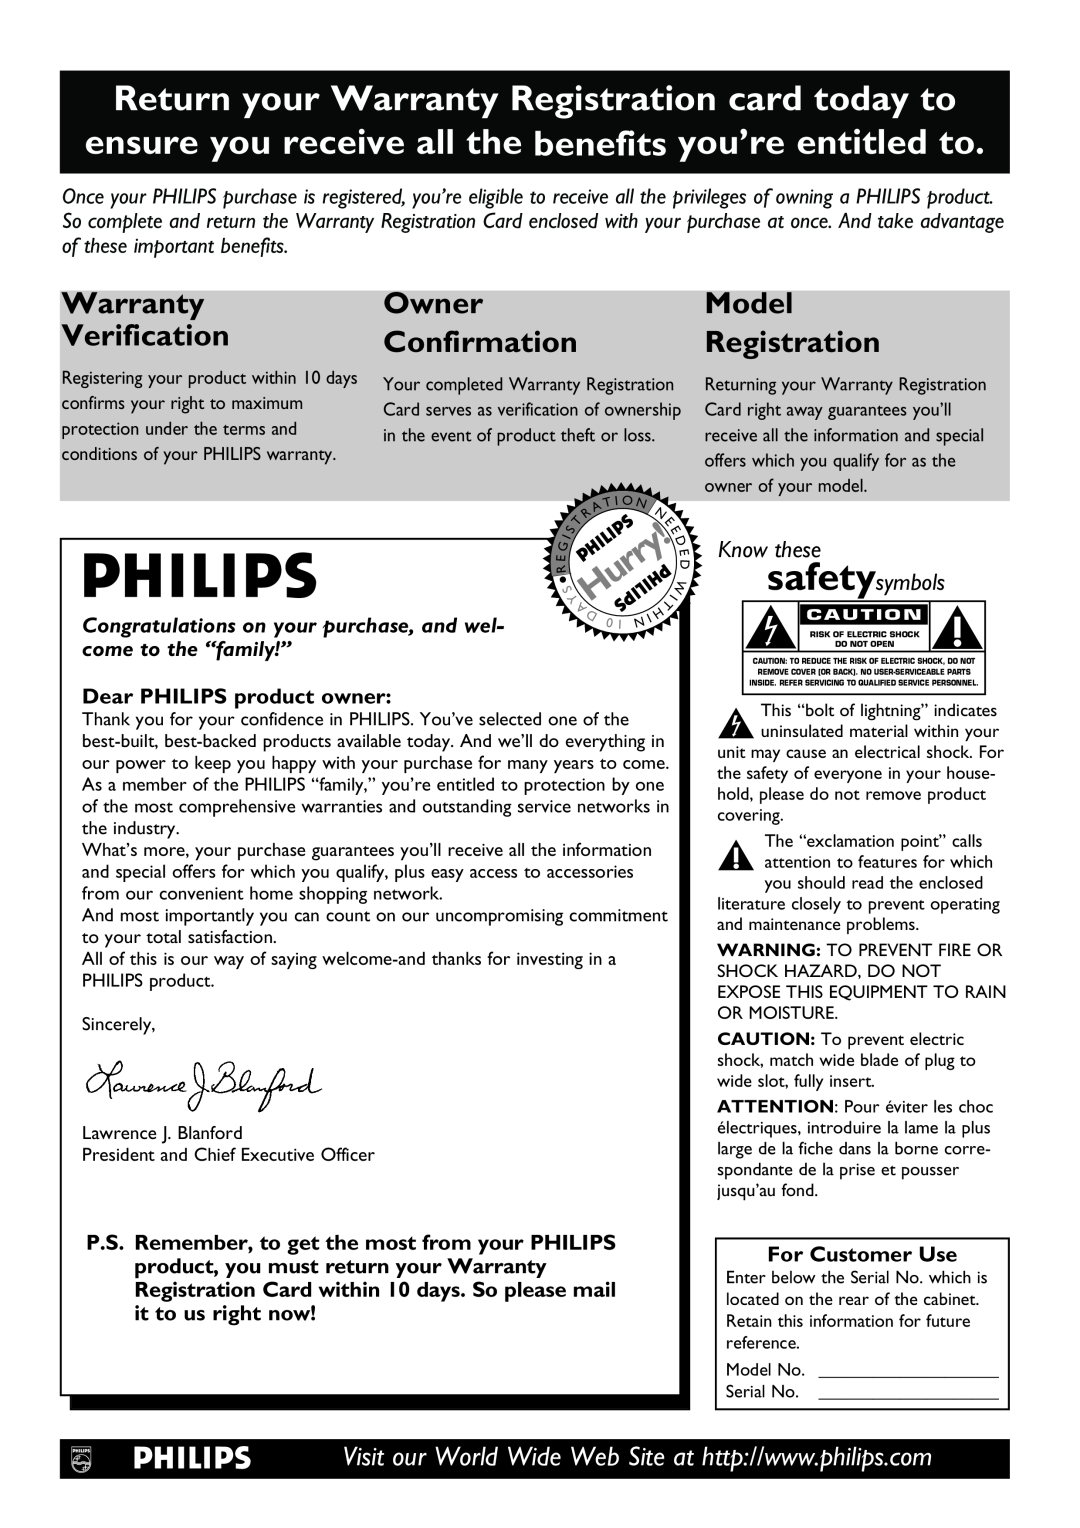 Philips DVD962SA Congratulations on your purchase, and wel, come to the “family!”, Dear PHILIPS product owner, Hurry!T 